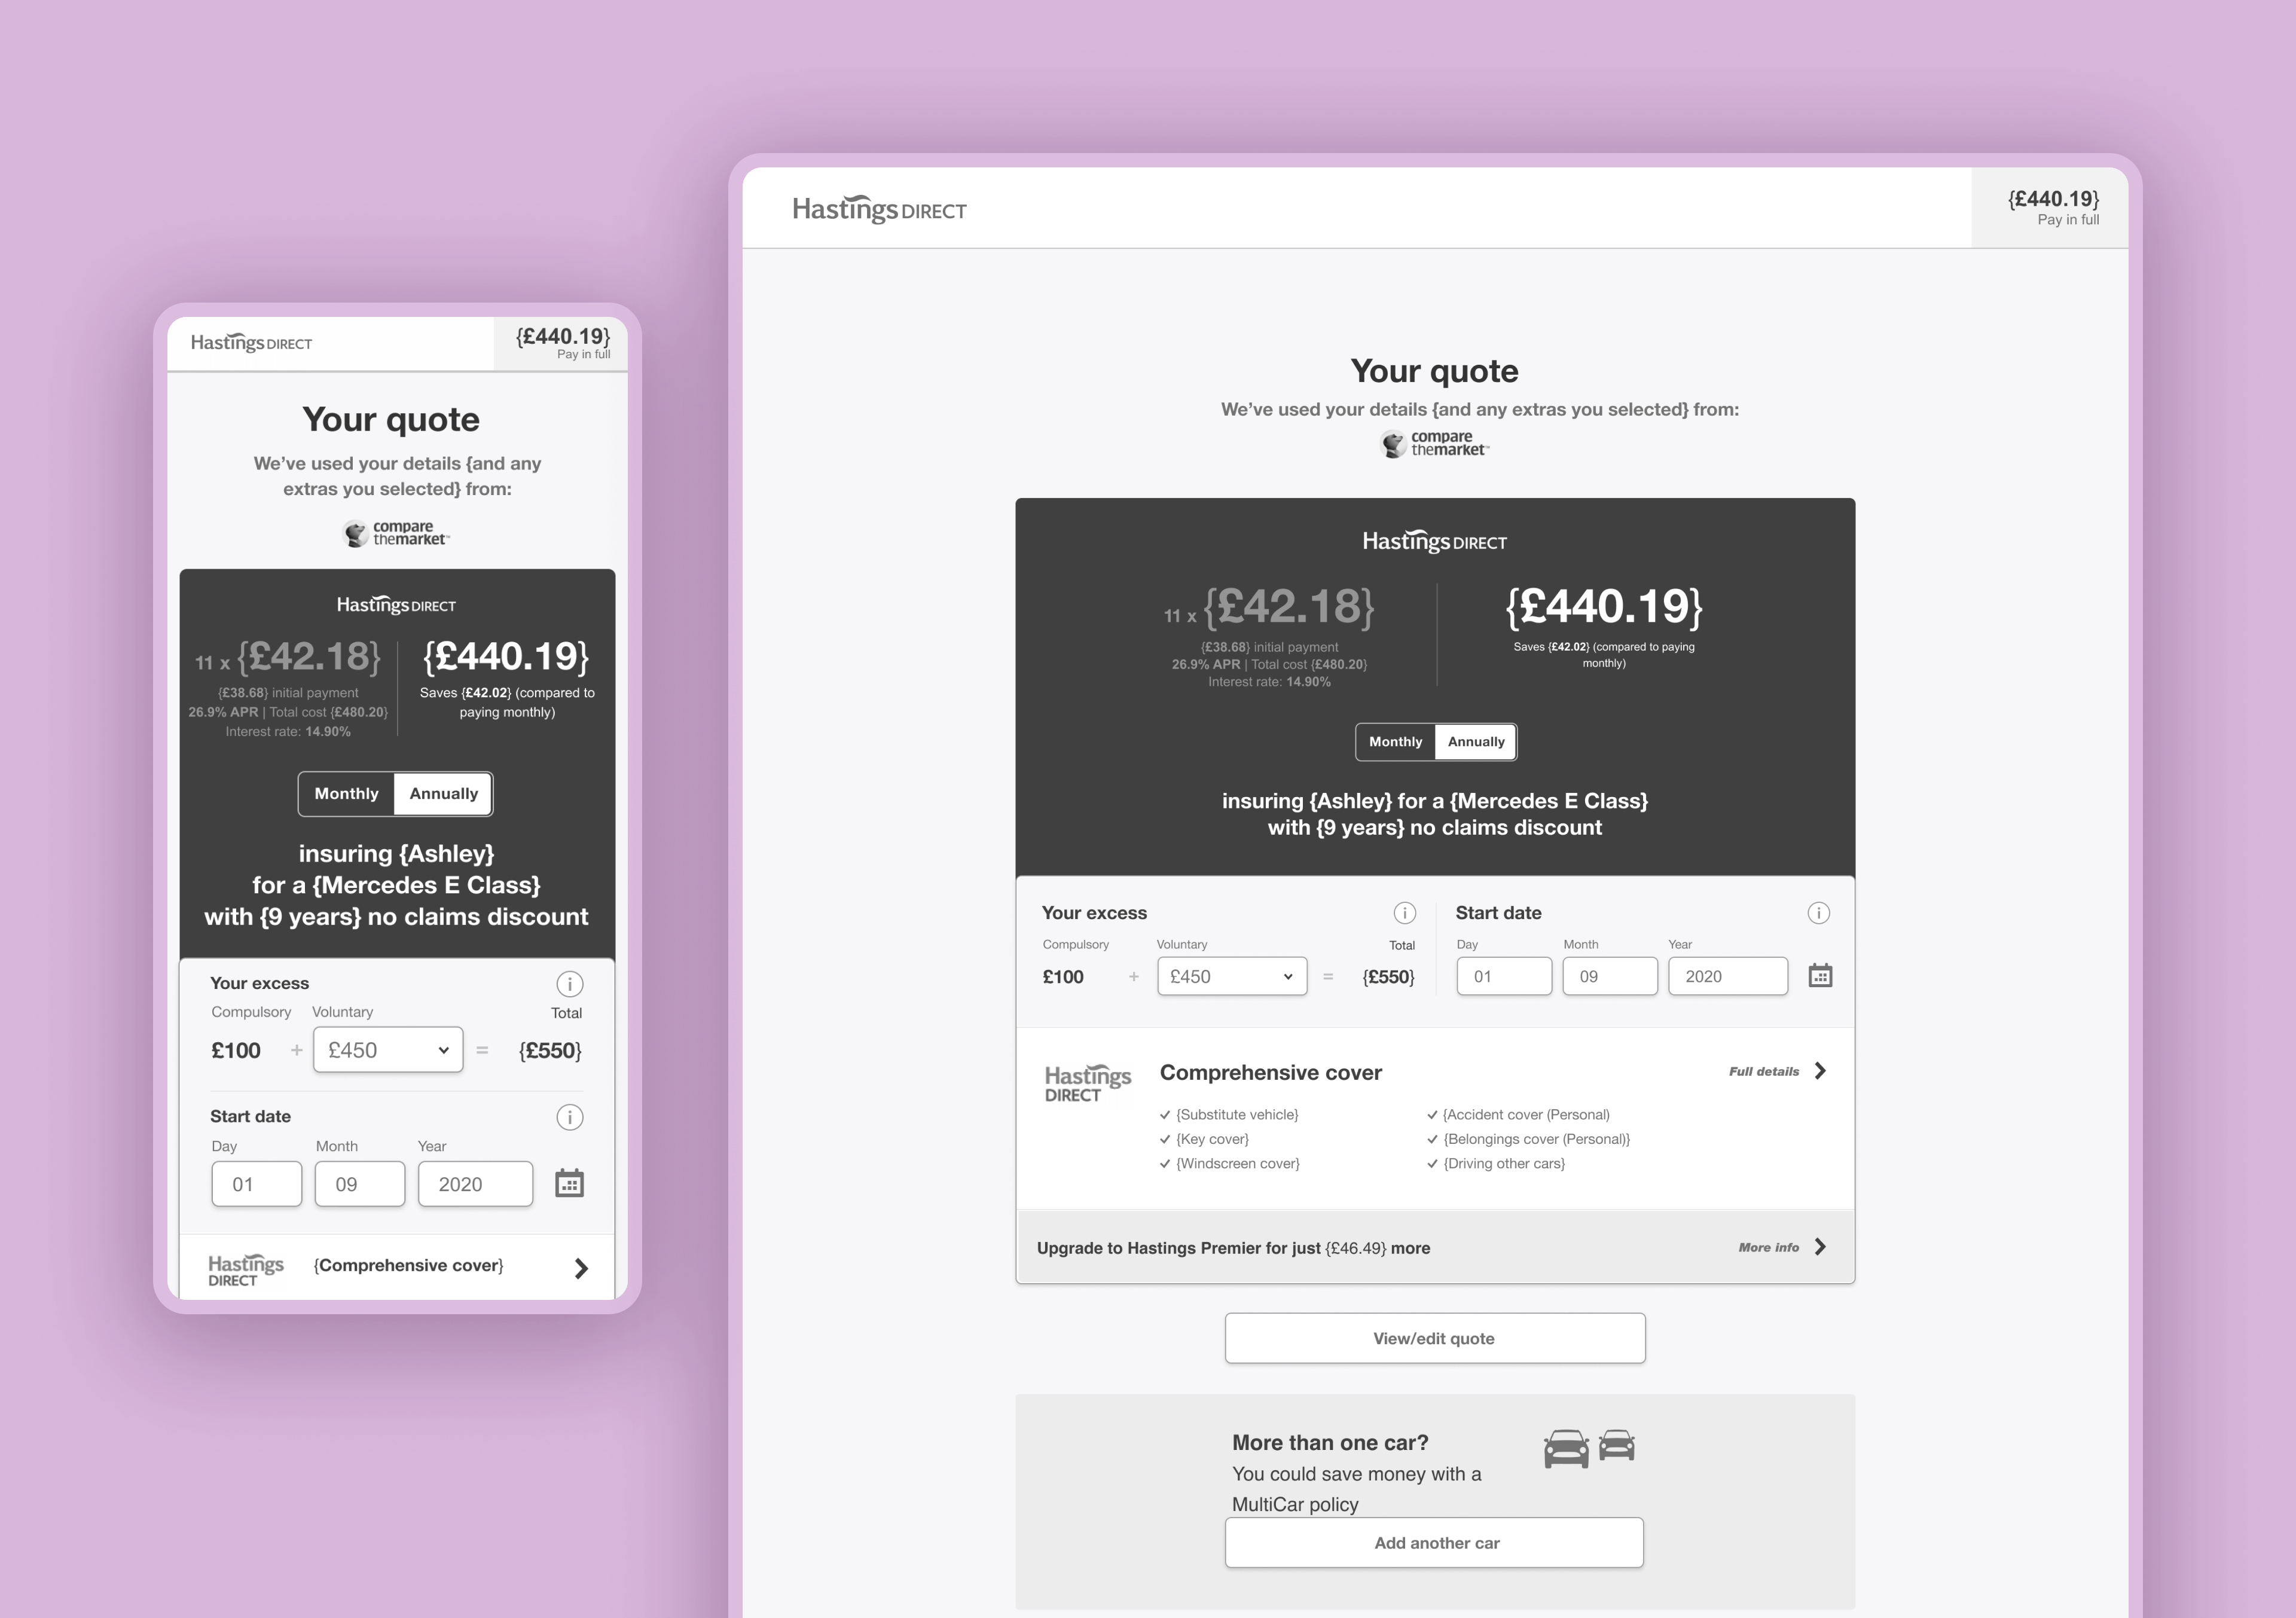 An image showing wireframes for an insurance quote page